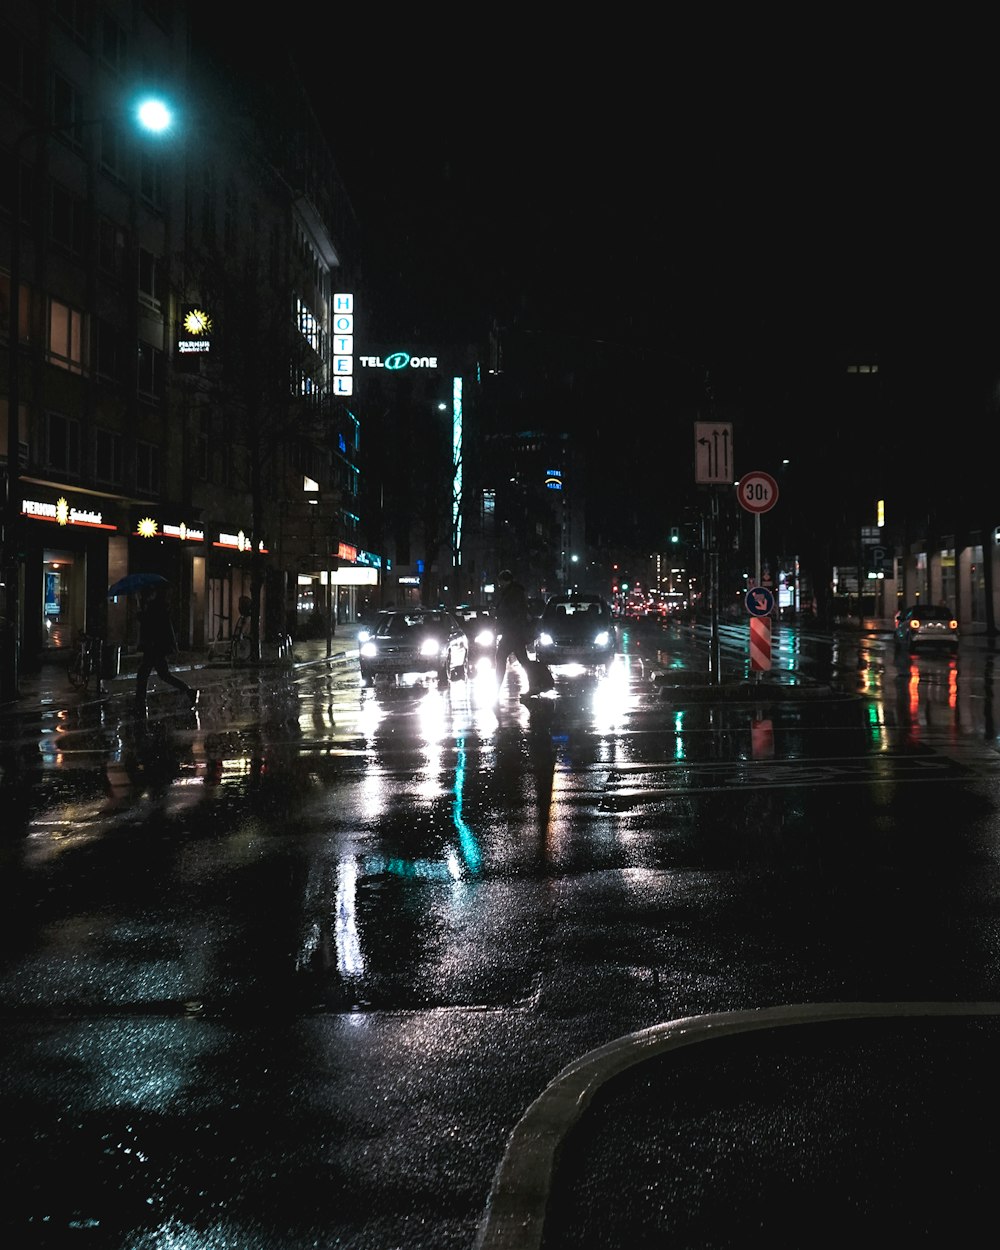 Cars on road during night time photo – Free Road Image on Unsplash